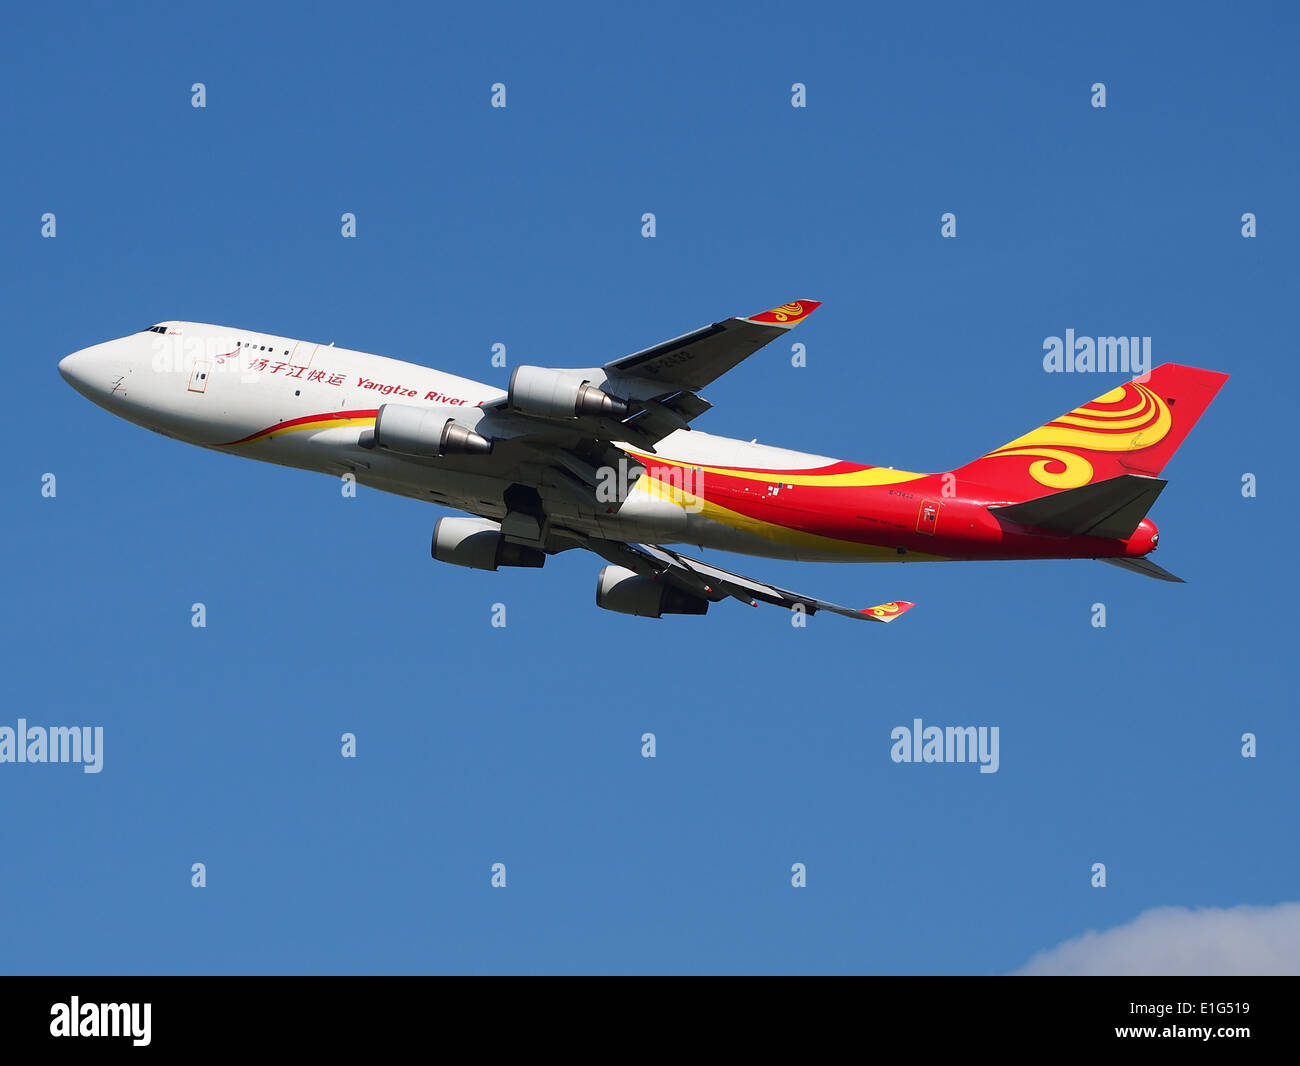 B-2432 Yangtze River Express Boeing 747-481(BDSF) at Schiphol (AMS - EHAM), The Netherlands, 16may2014, pic-5 Stock Photo